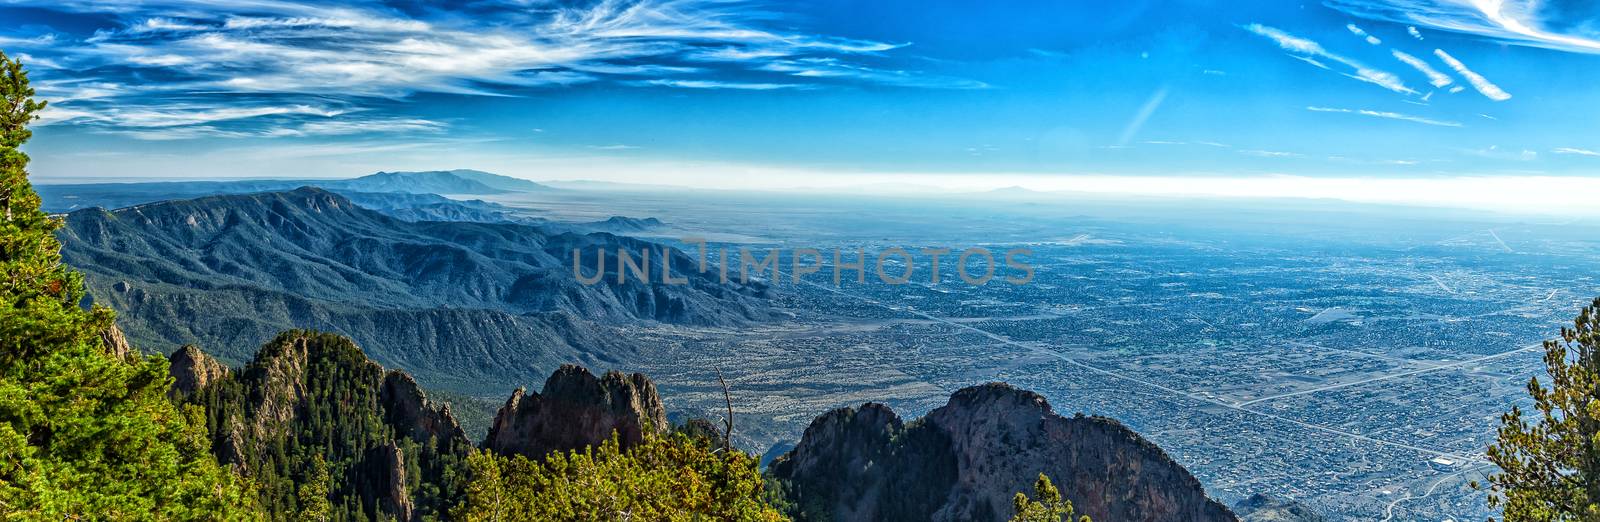 A mile above Albuquerque by adifferentbrian